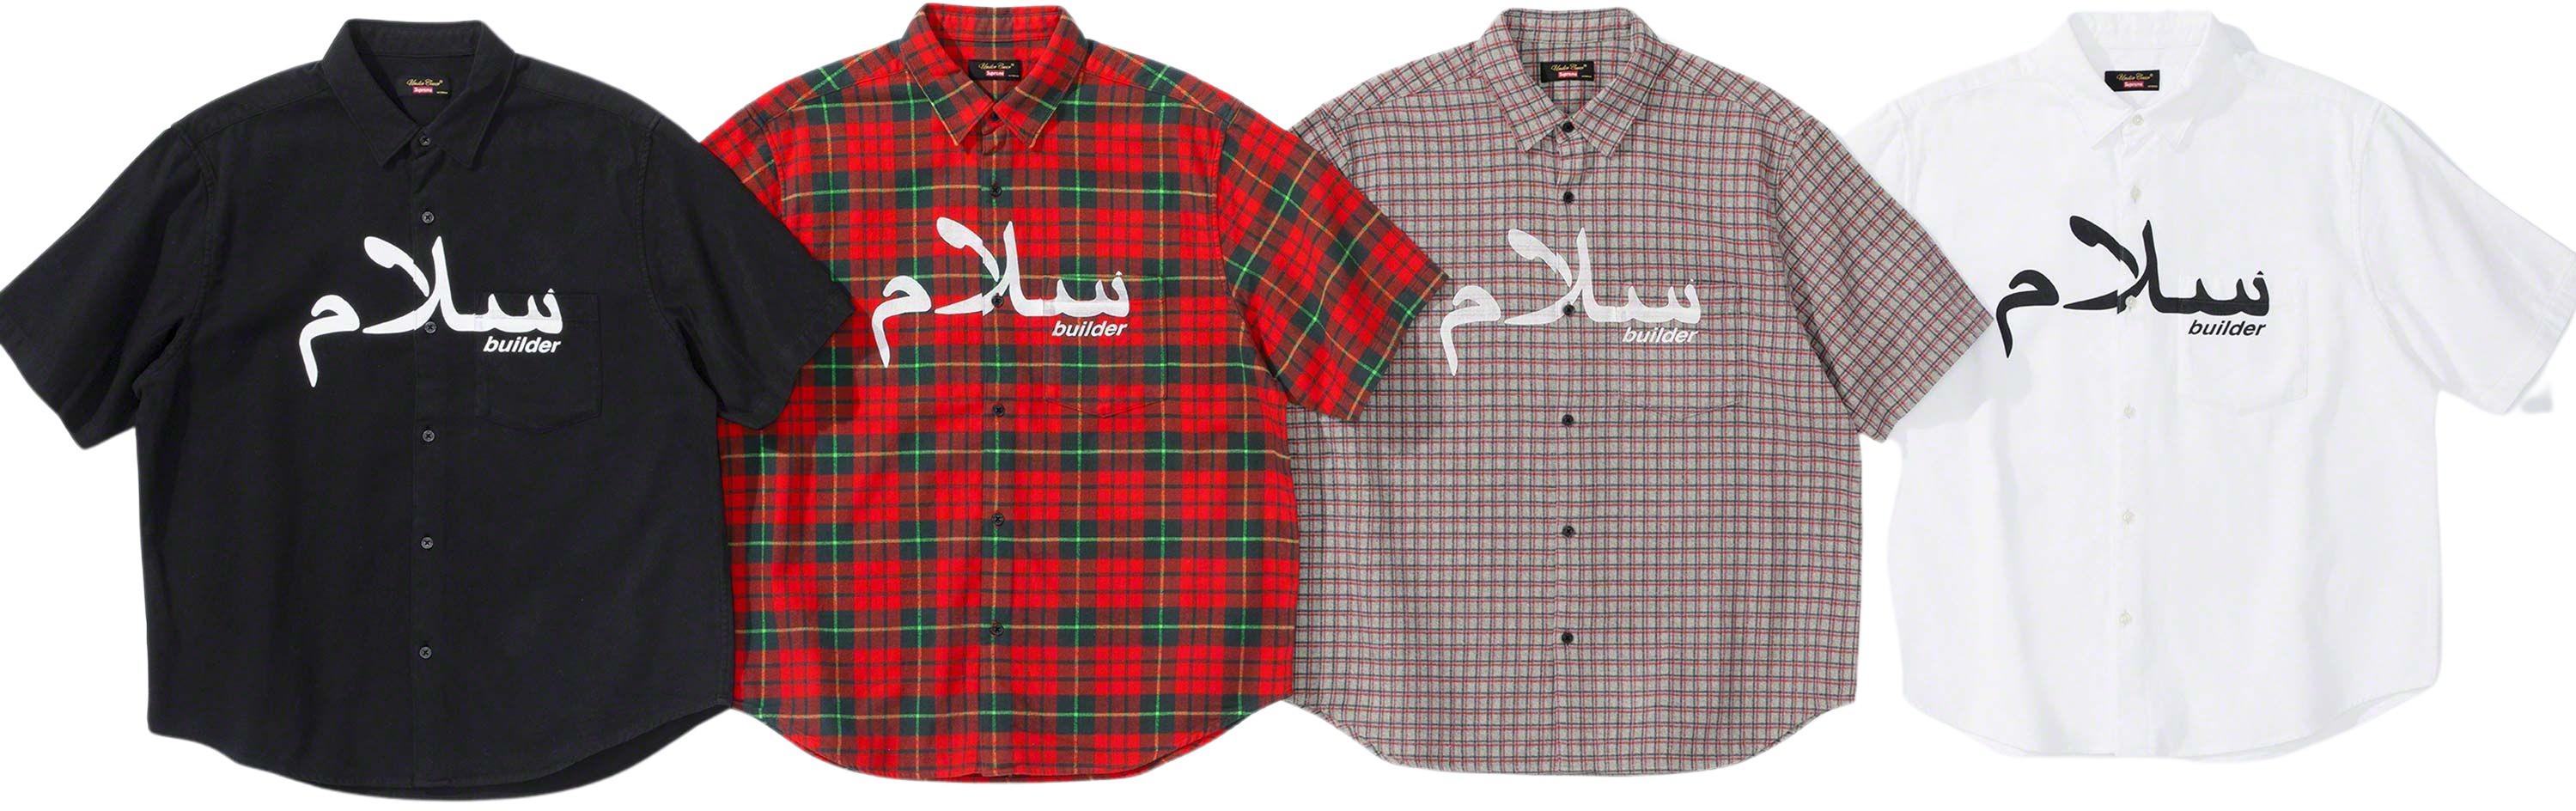 Supreme UNDERCOVER S/S Flannel Shirt